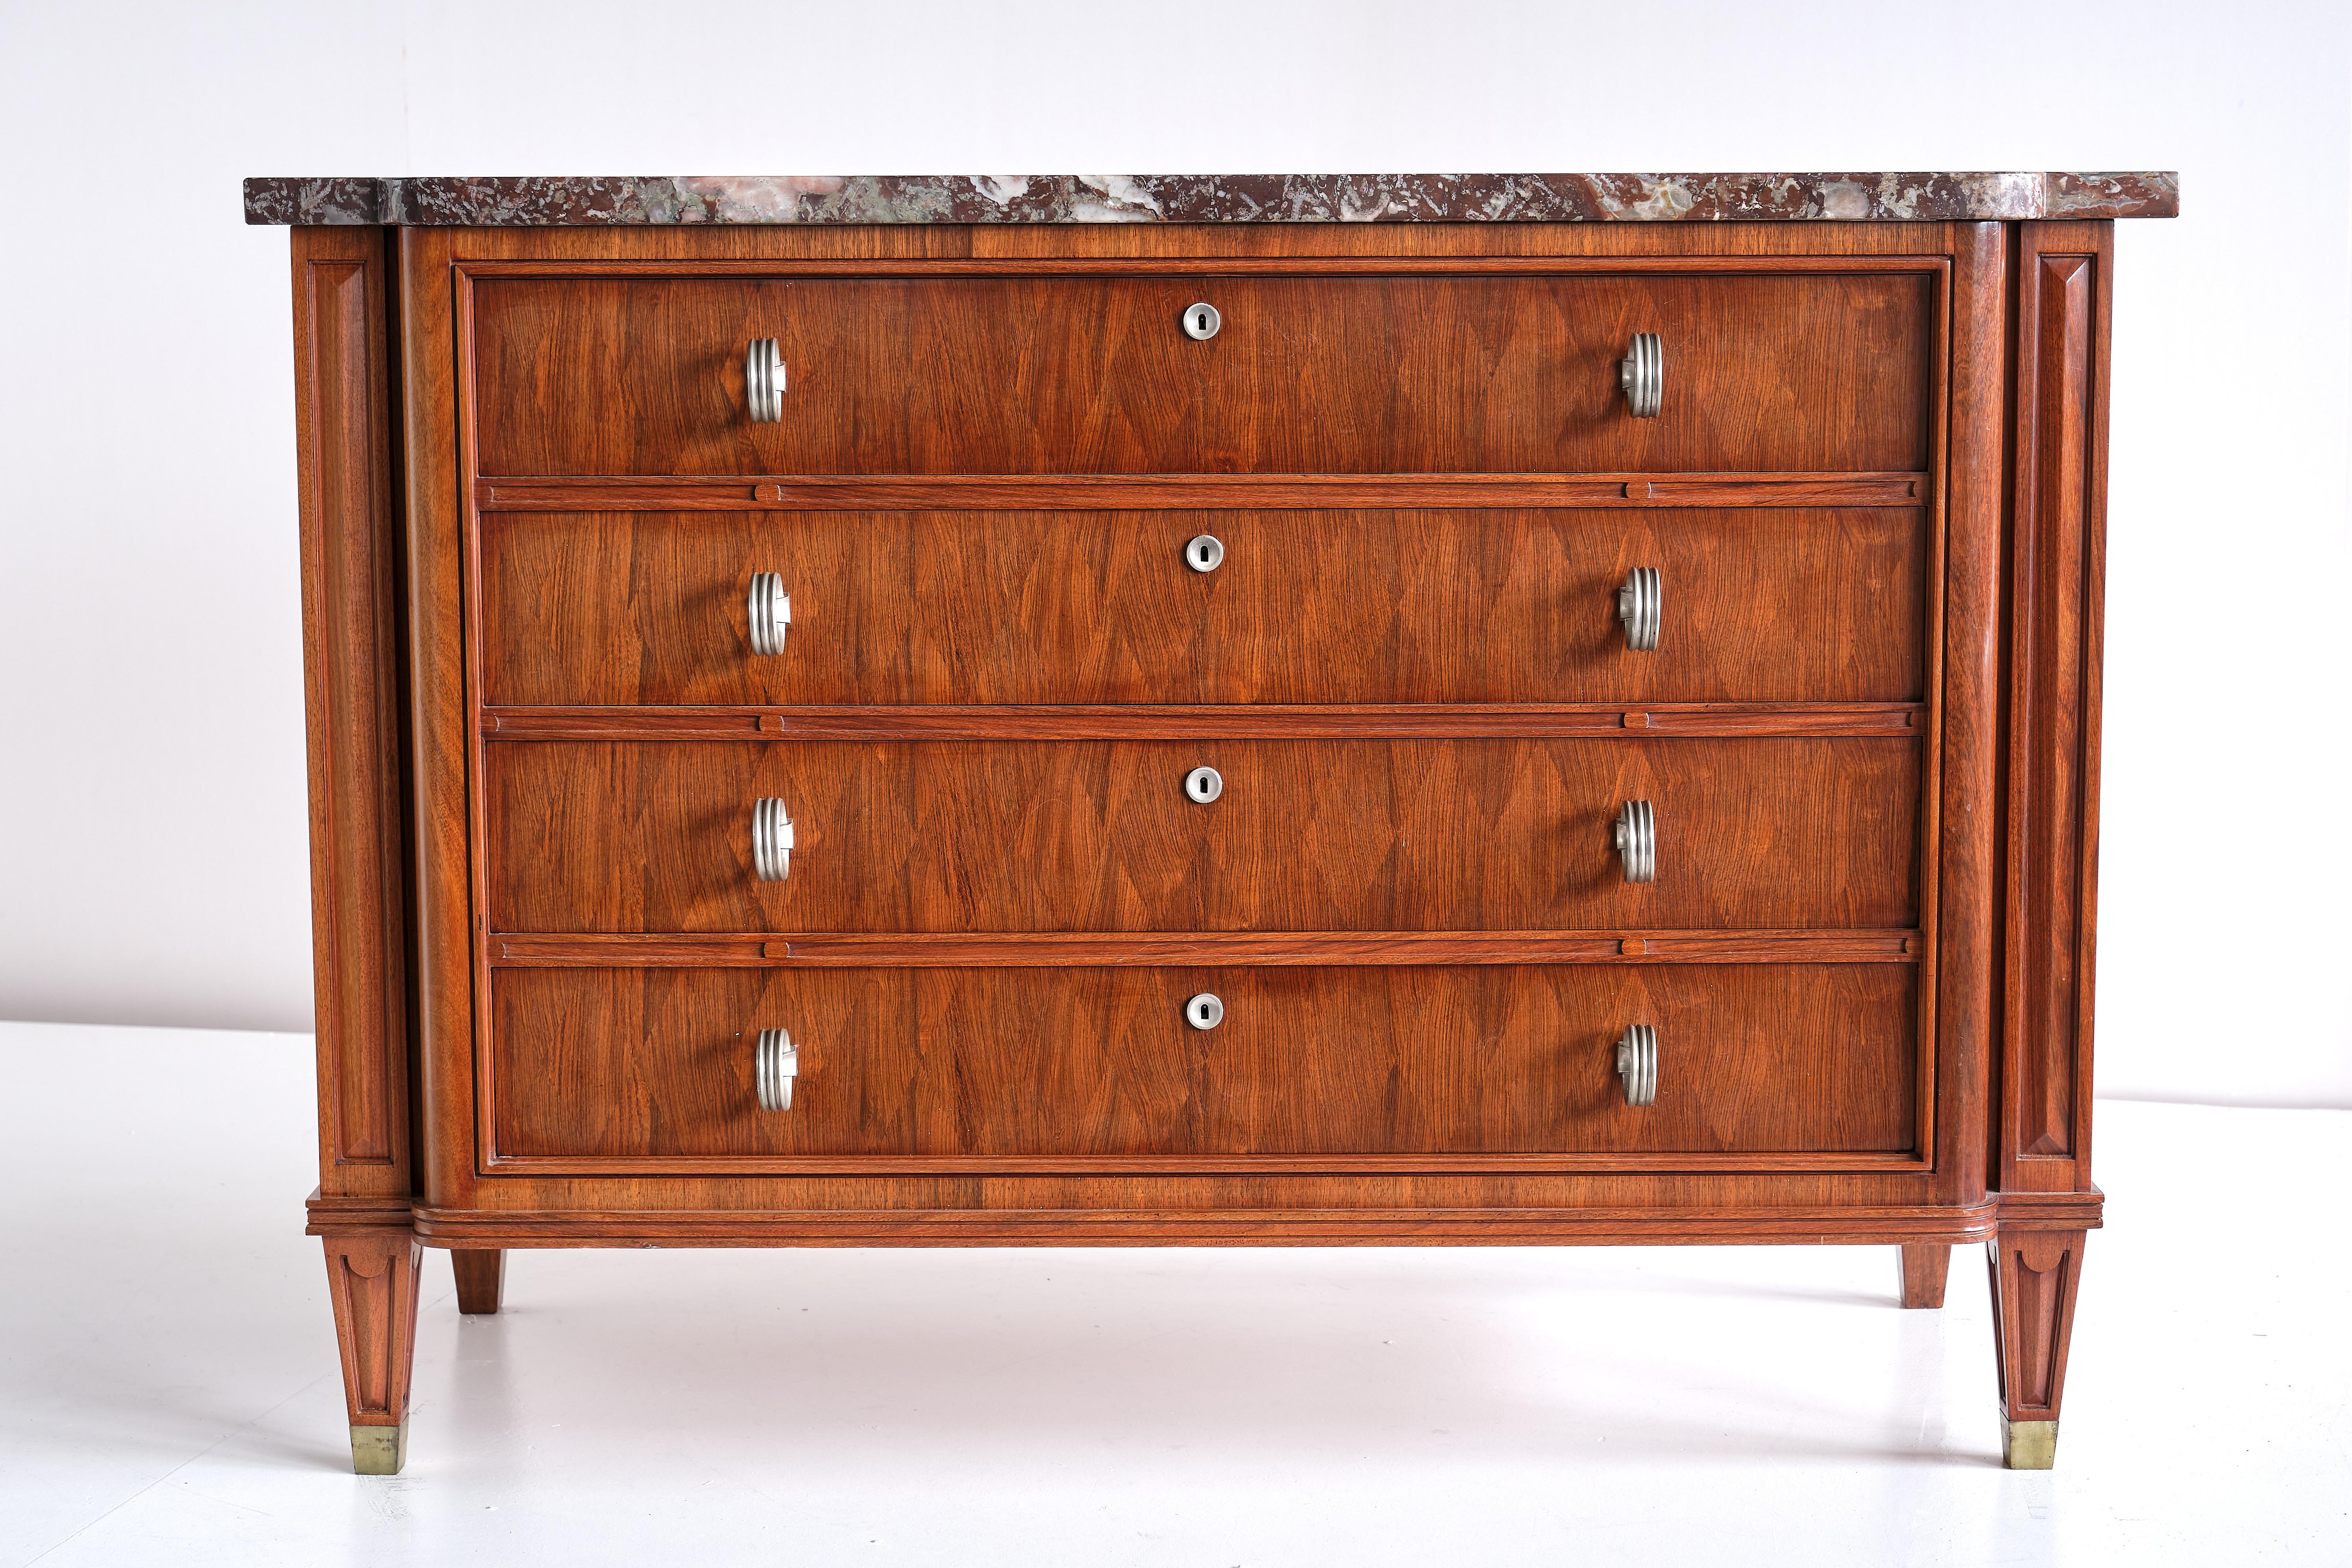 This exceptionally rare commode was designed by Lucien Rollin and produced in France in November 1945. The commode consists of four drawers mounted with brushed metal escutcheons and circular protruding handles. The drawers are executed in a